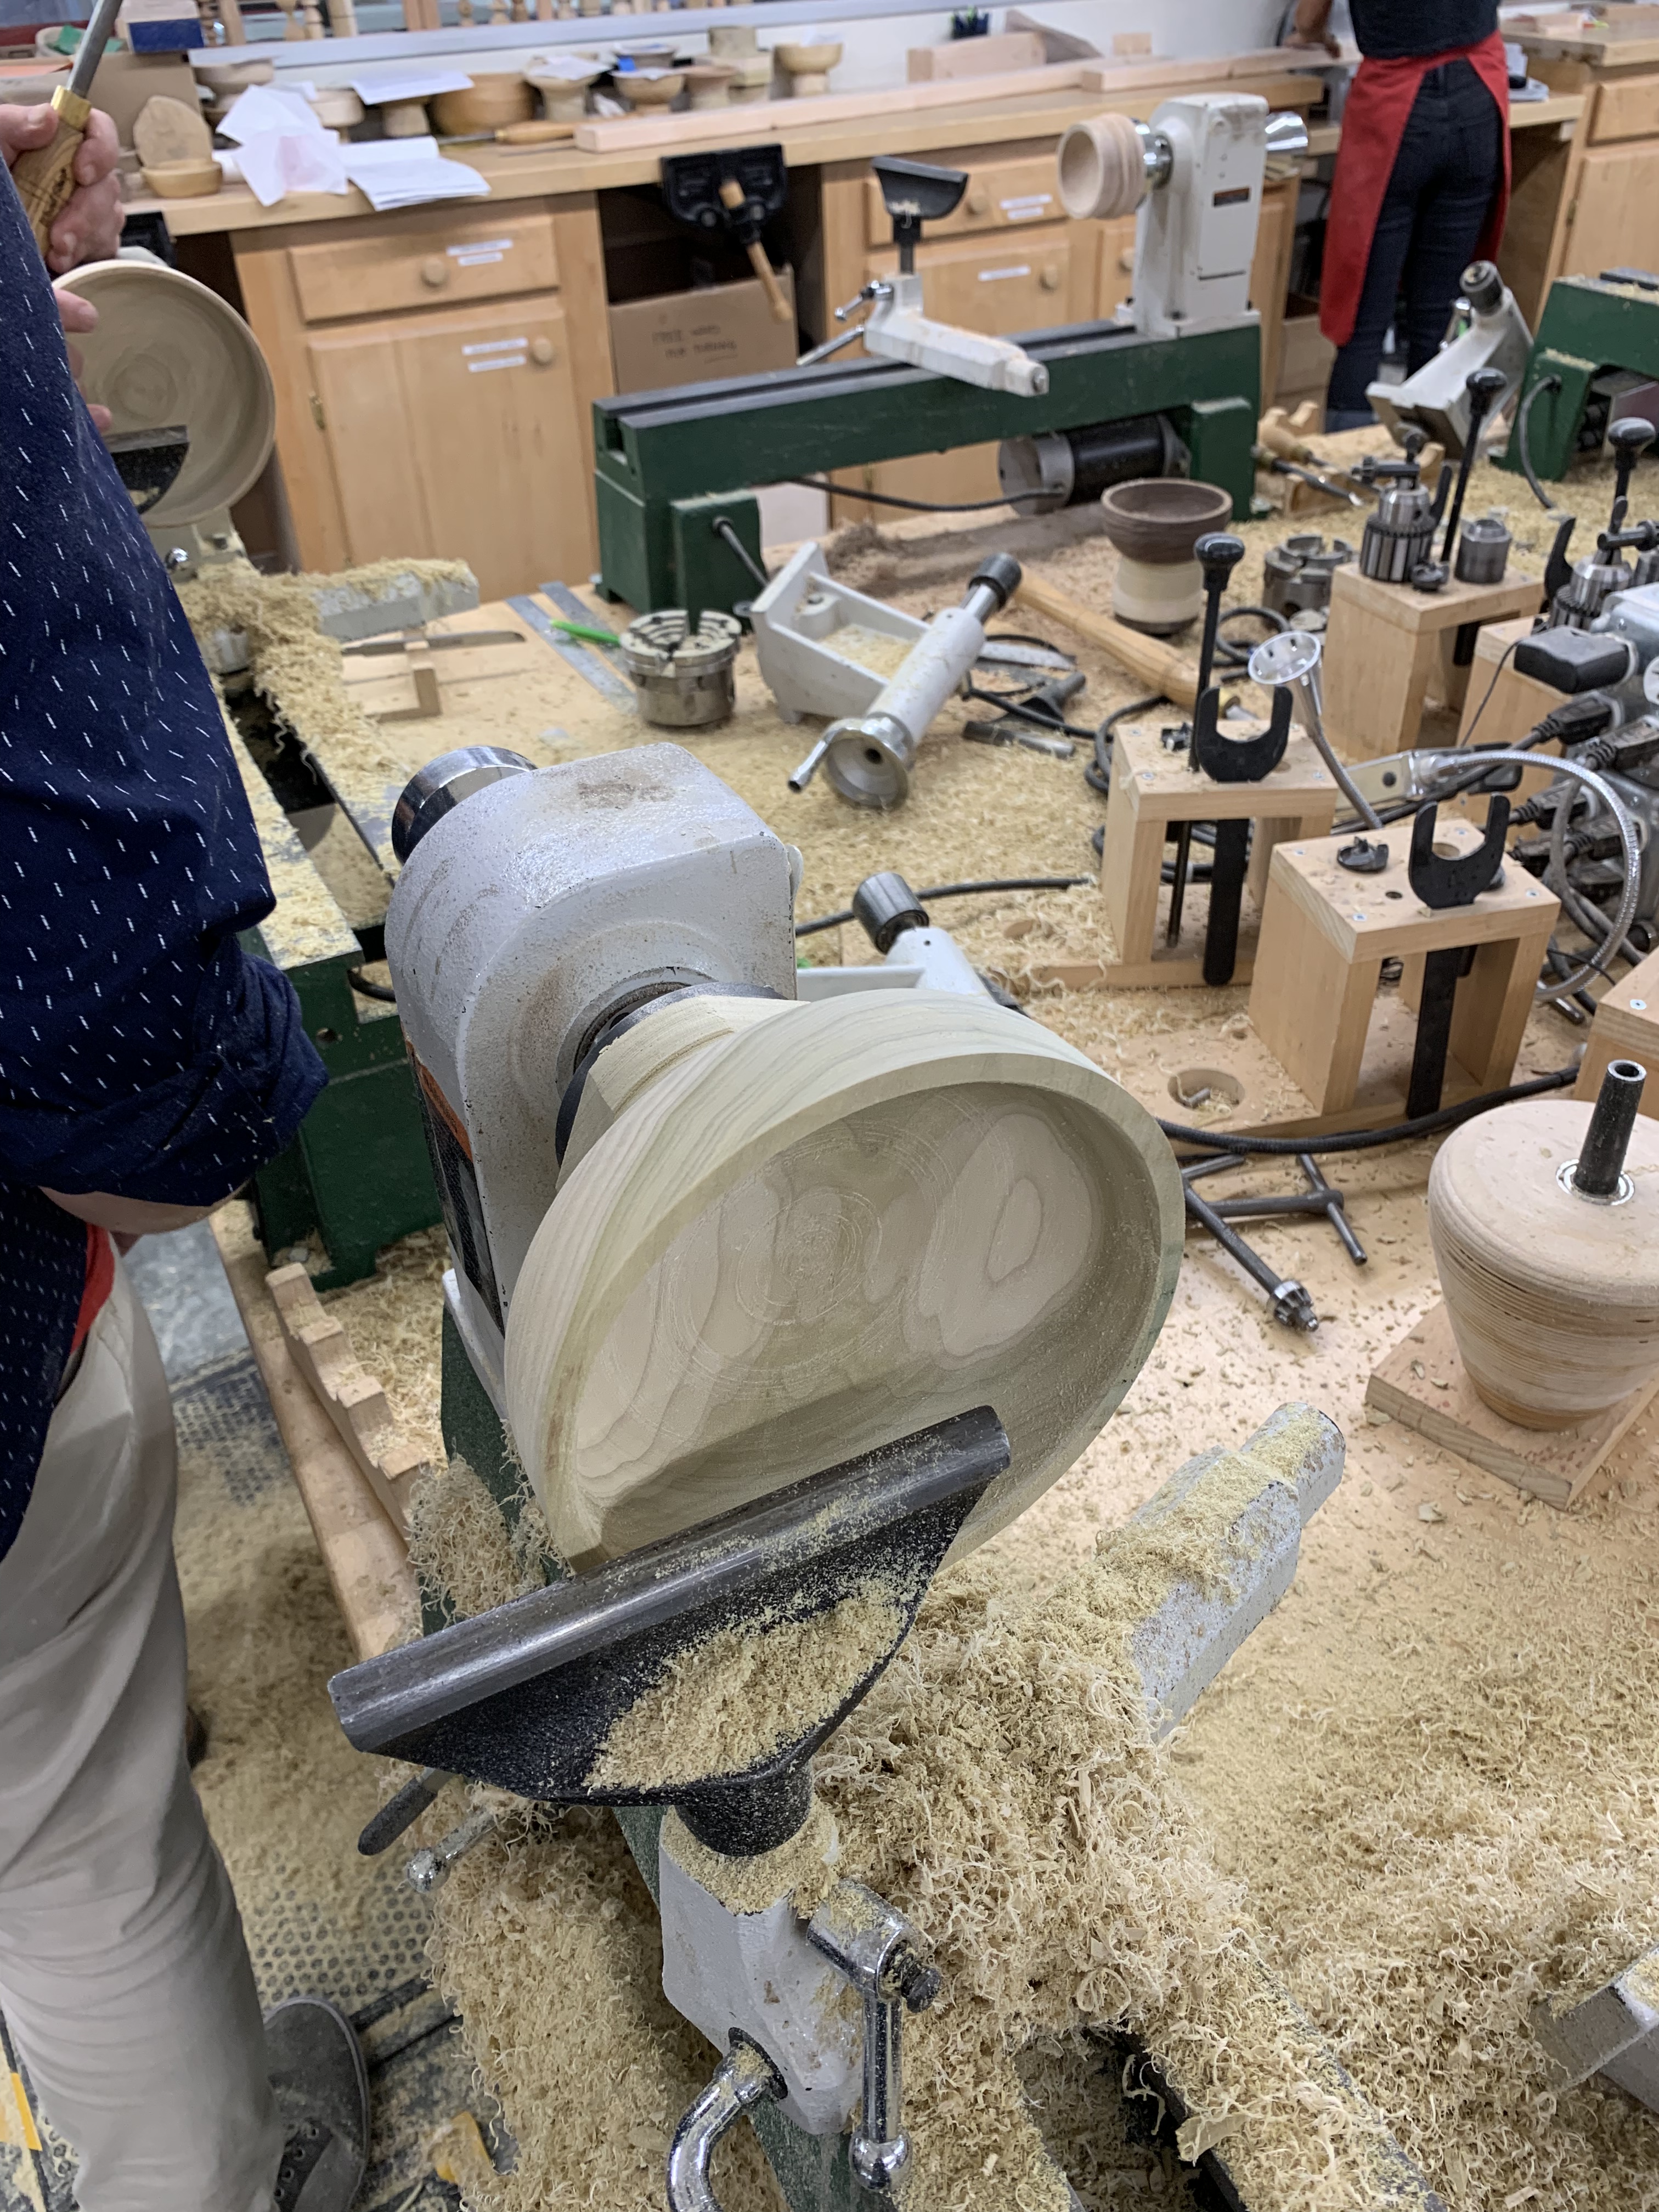 thewoodworkingconsultant | An amature woodworker who works ...